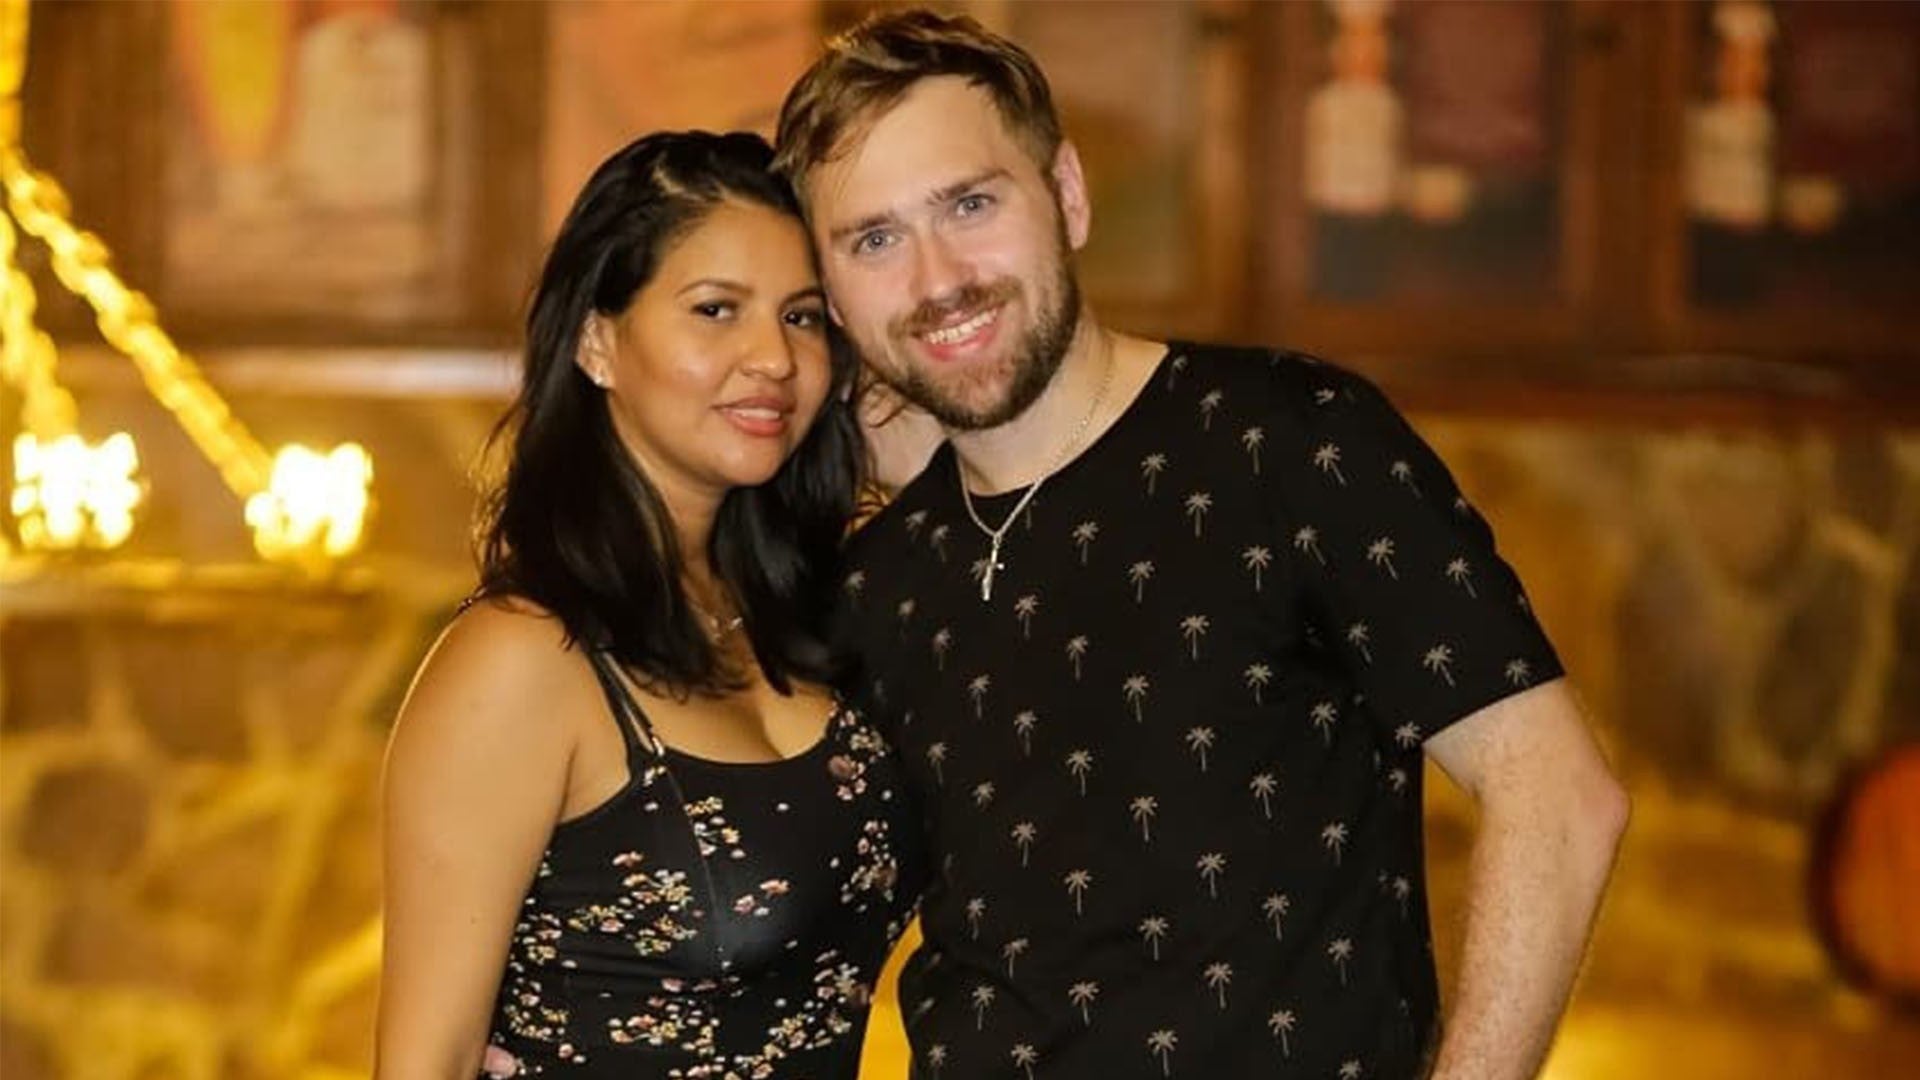 90 Day Fiance: The Other Way' Couple Paul Staehle and Karine Martins S...